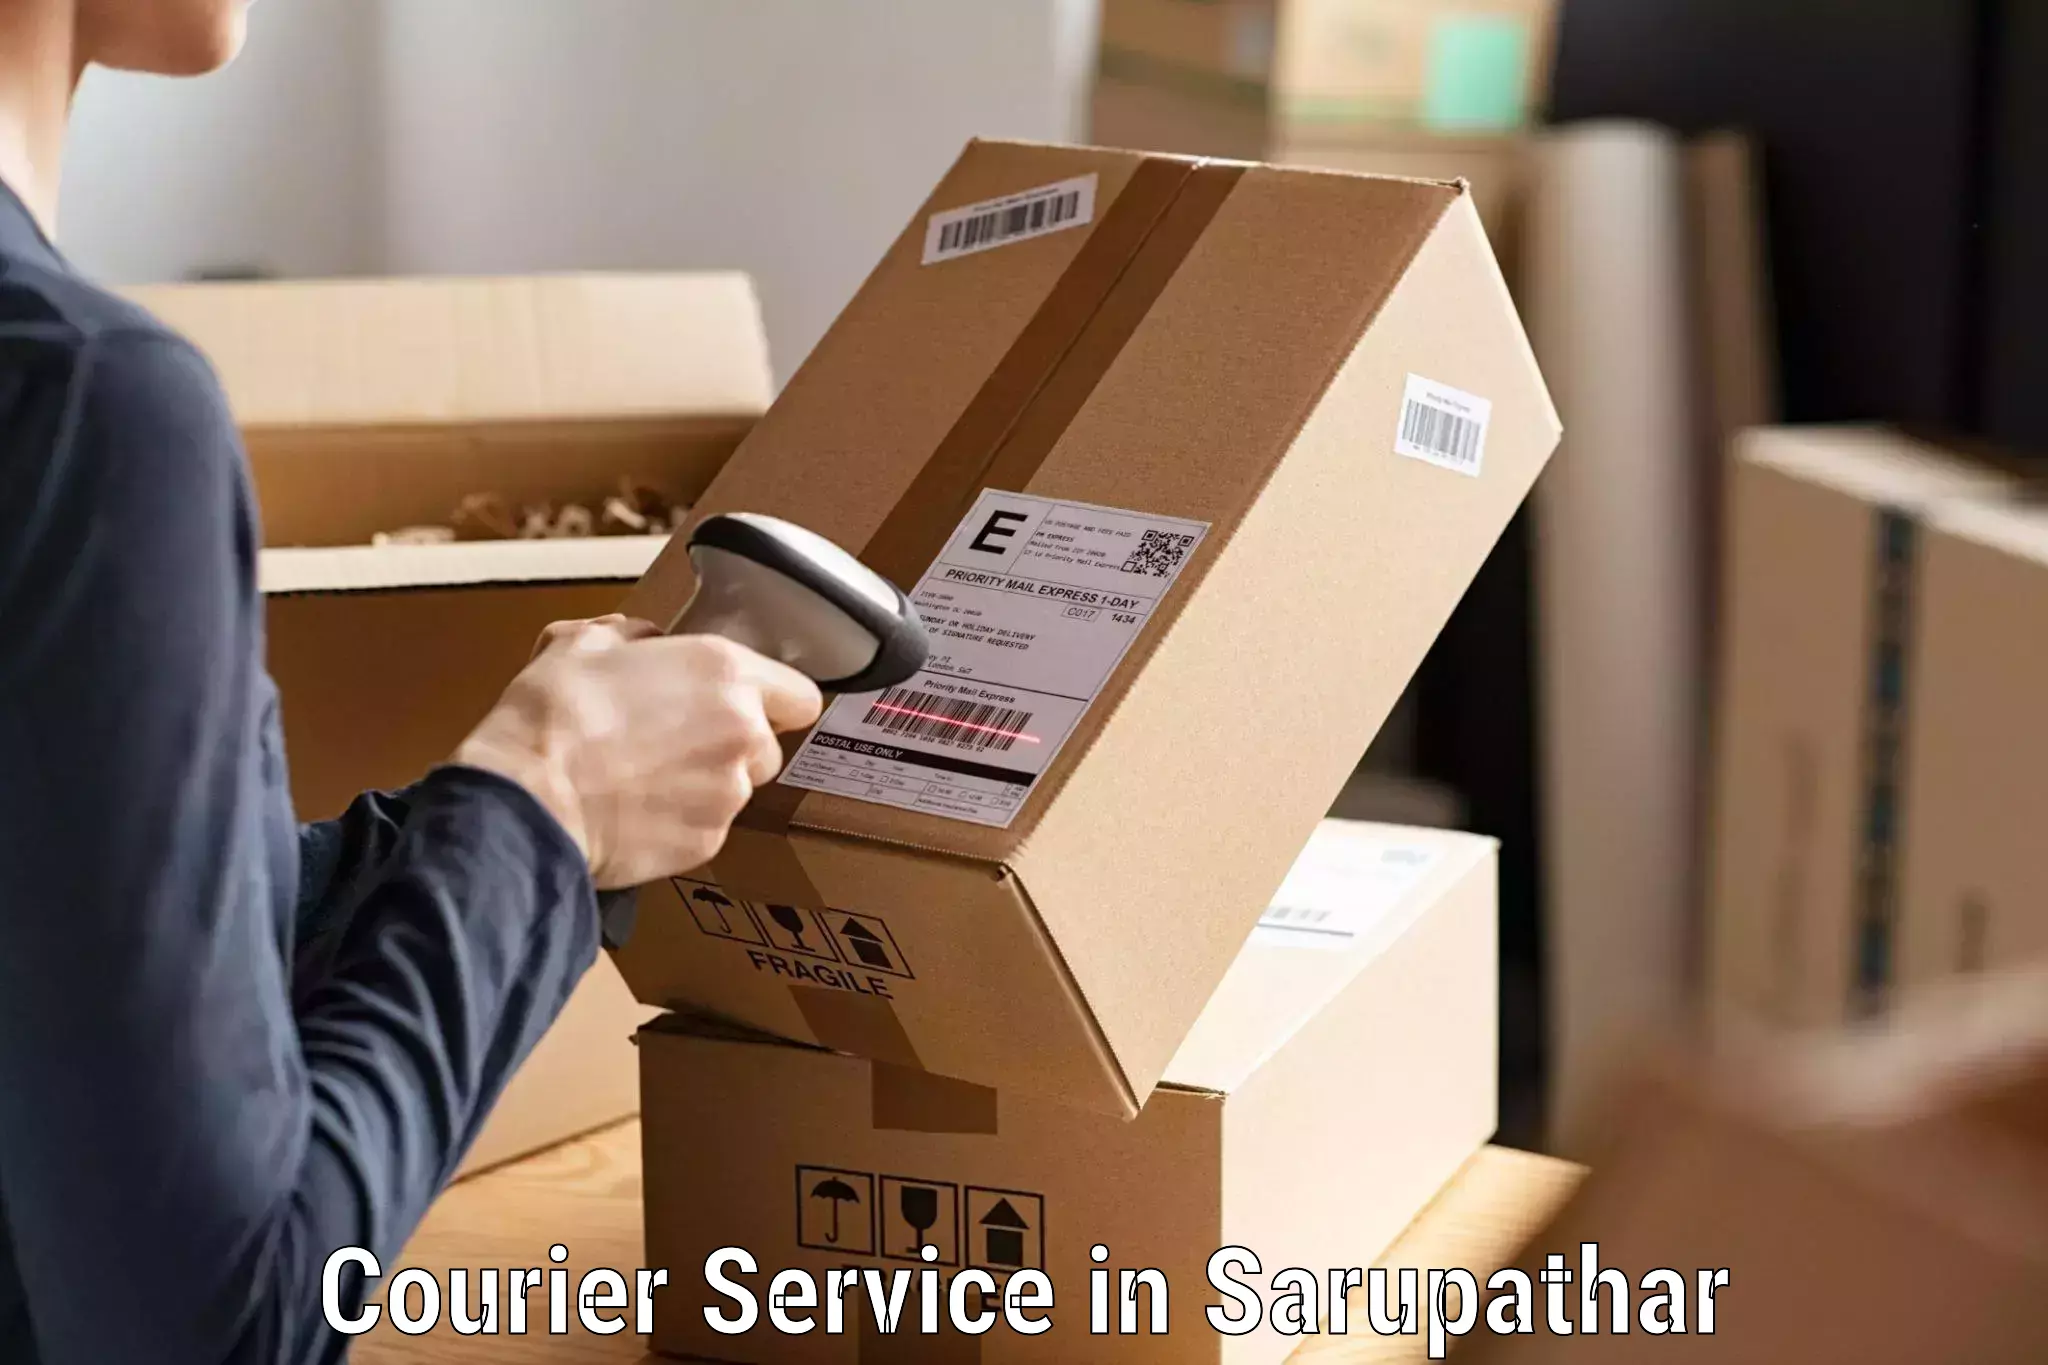 Courier insurance in Sarupathar